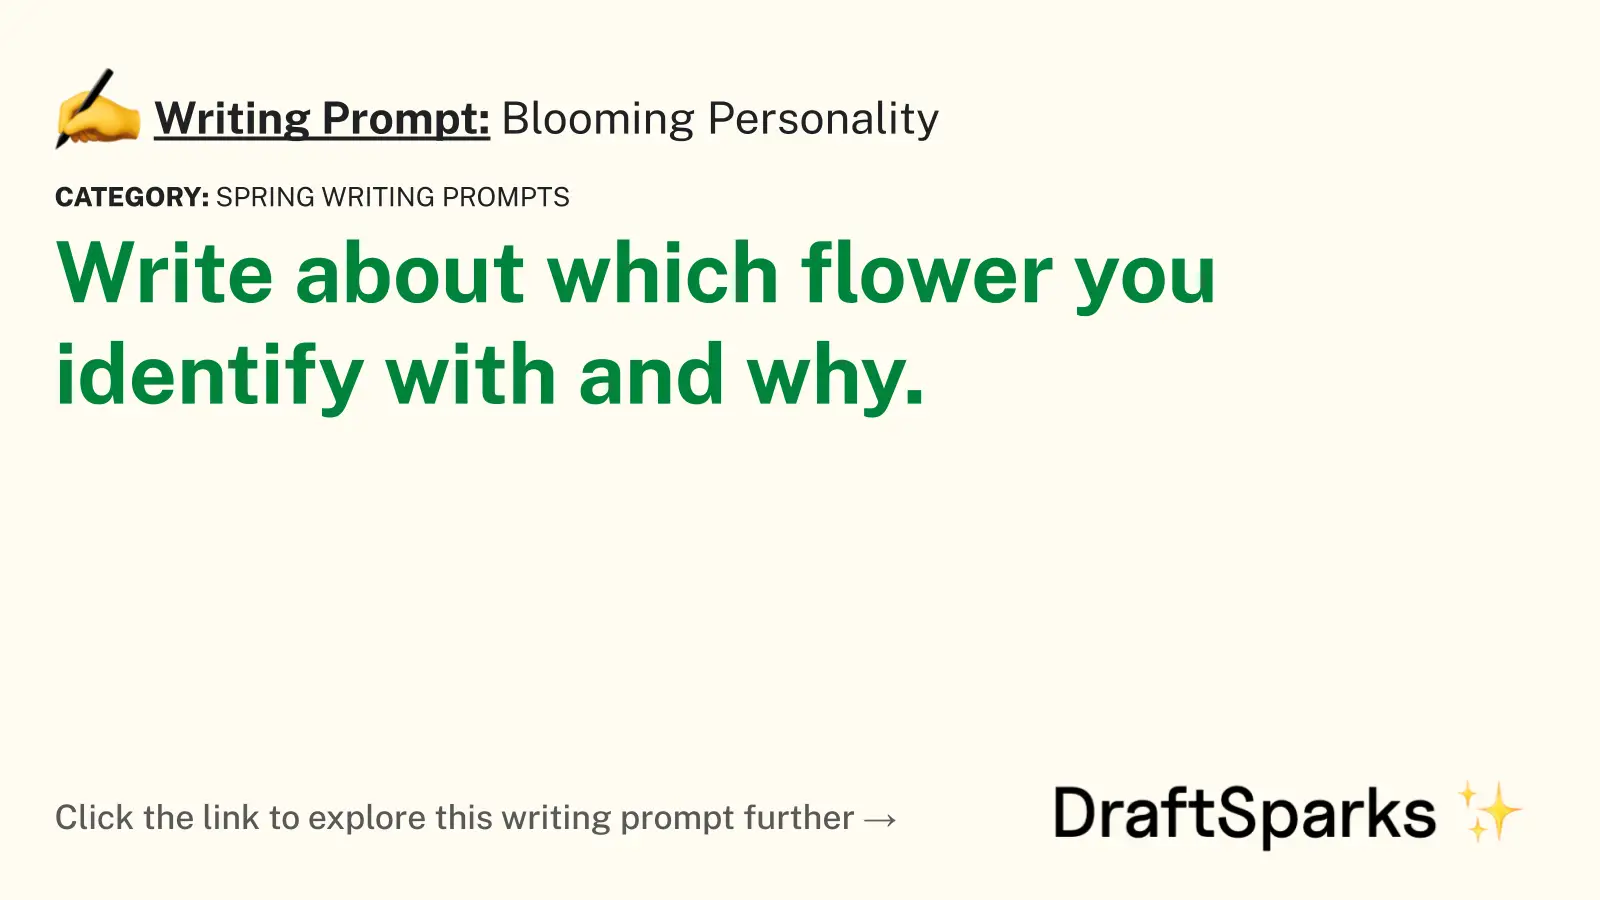 Blooming Personality